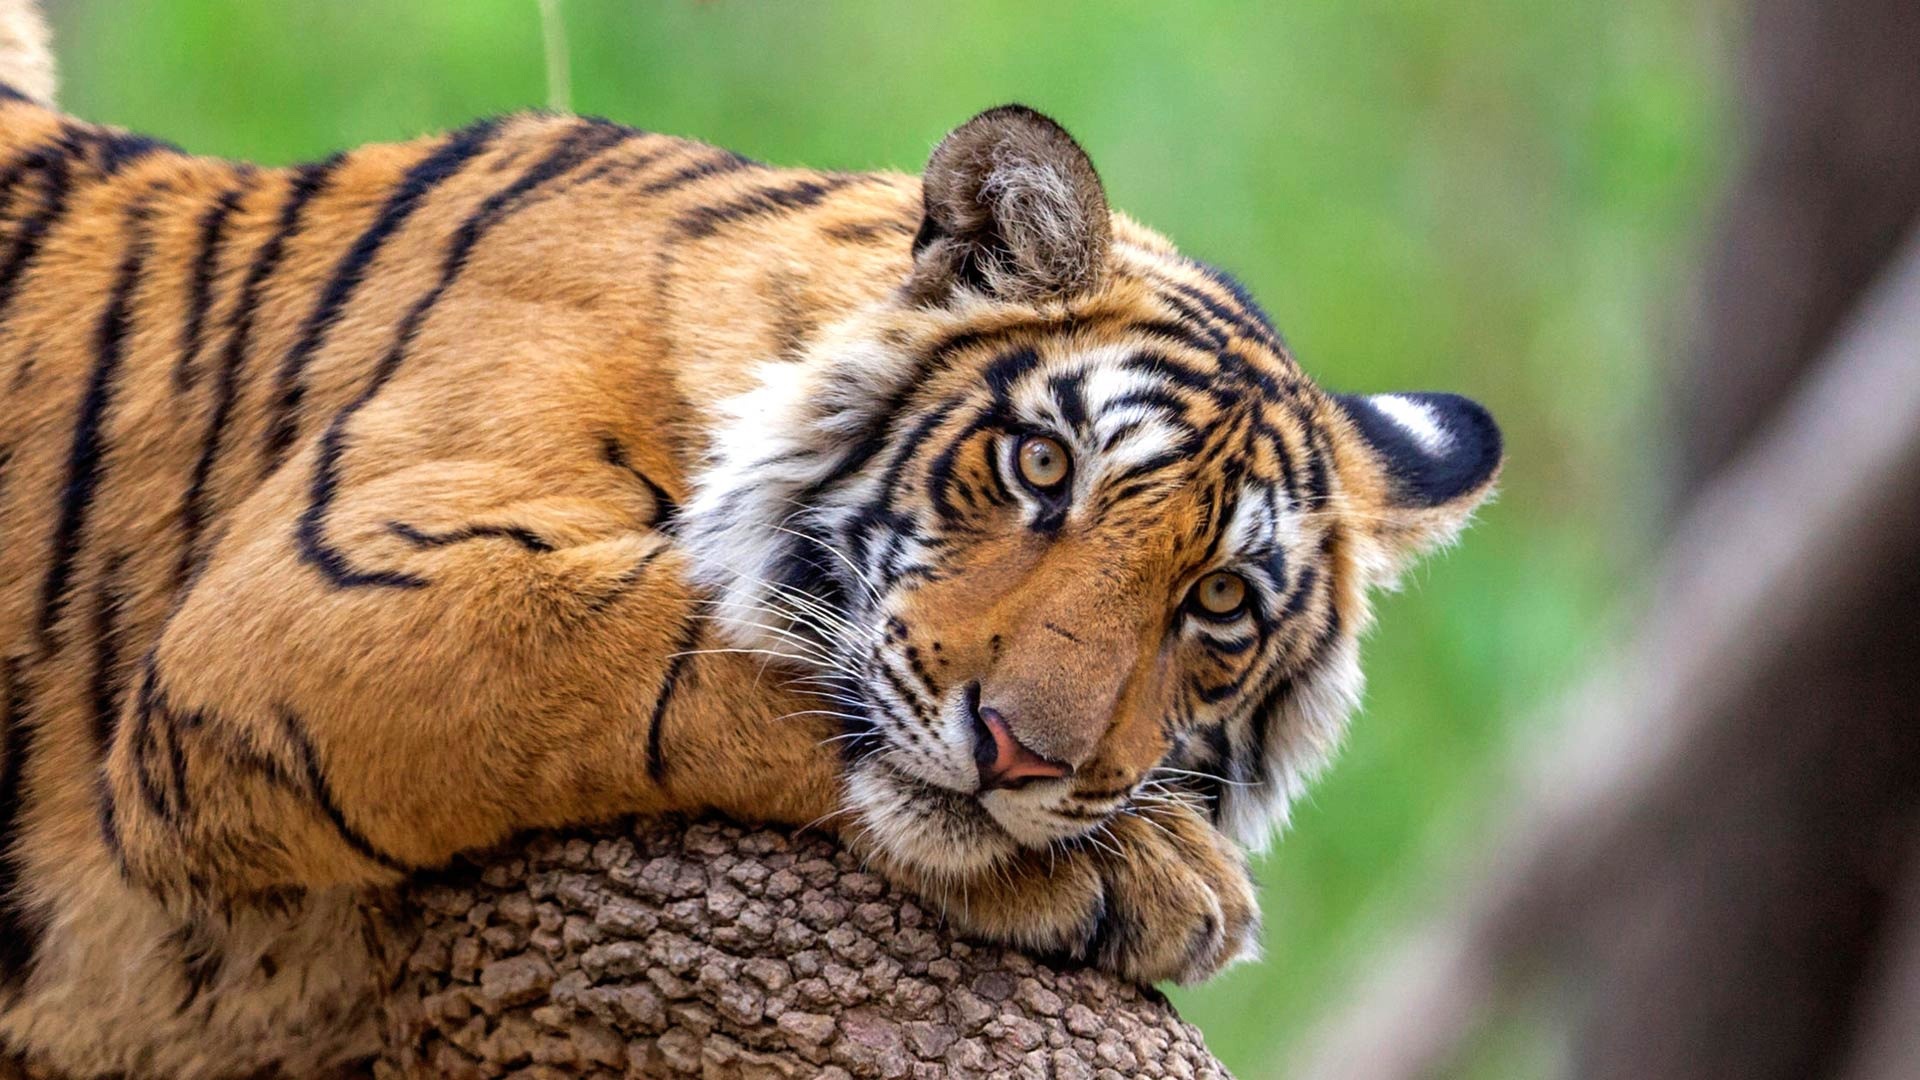 Wallpaper Tiger Rest, Look At You - Bengal Tiger On A Tree - HD Wallpaper 